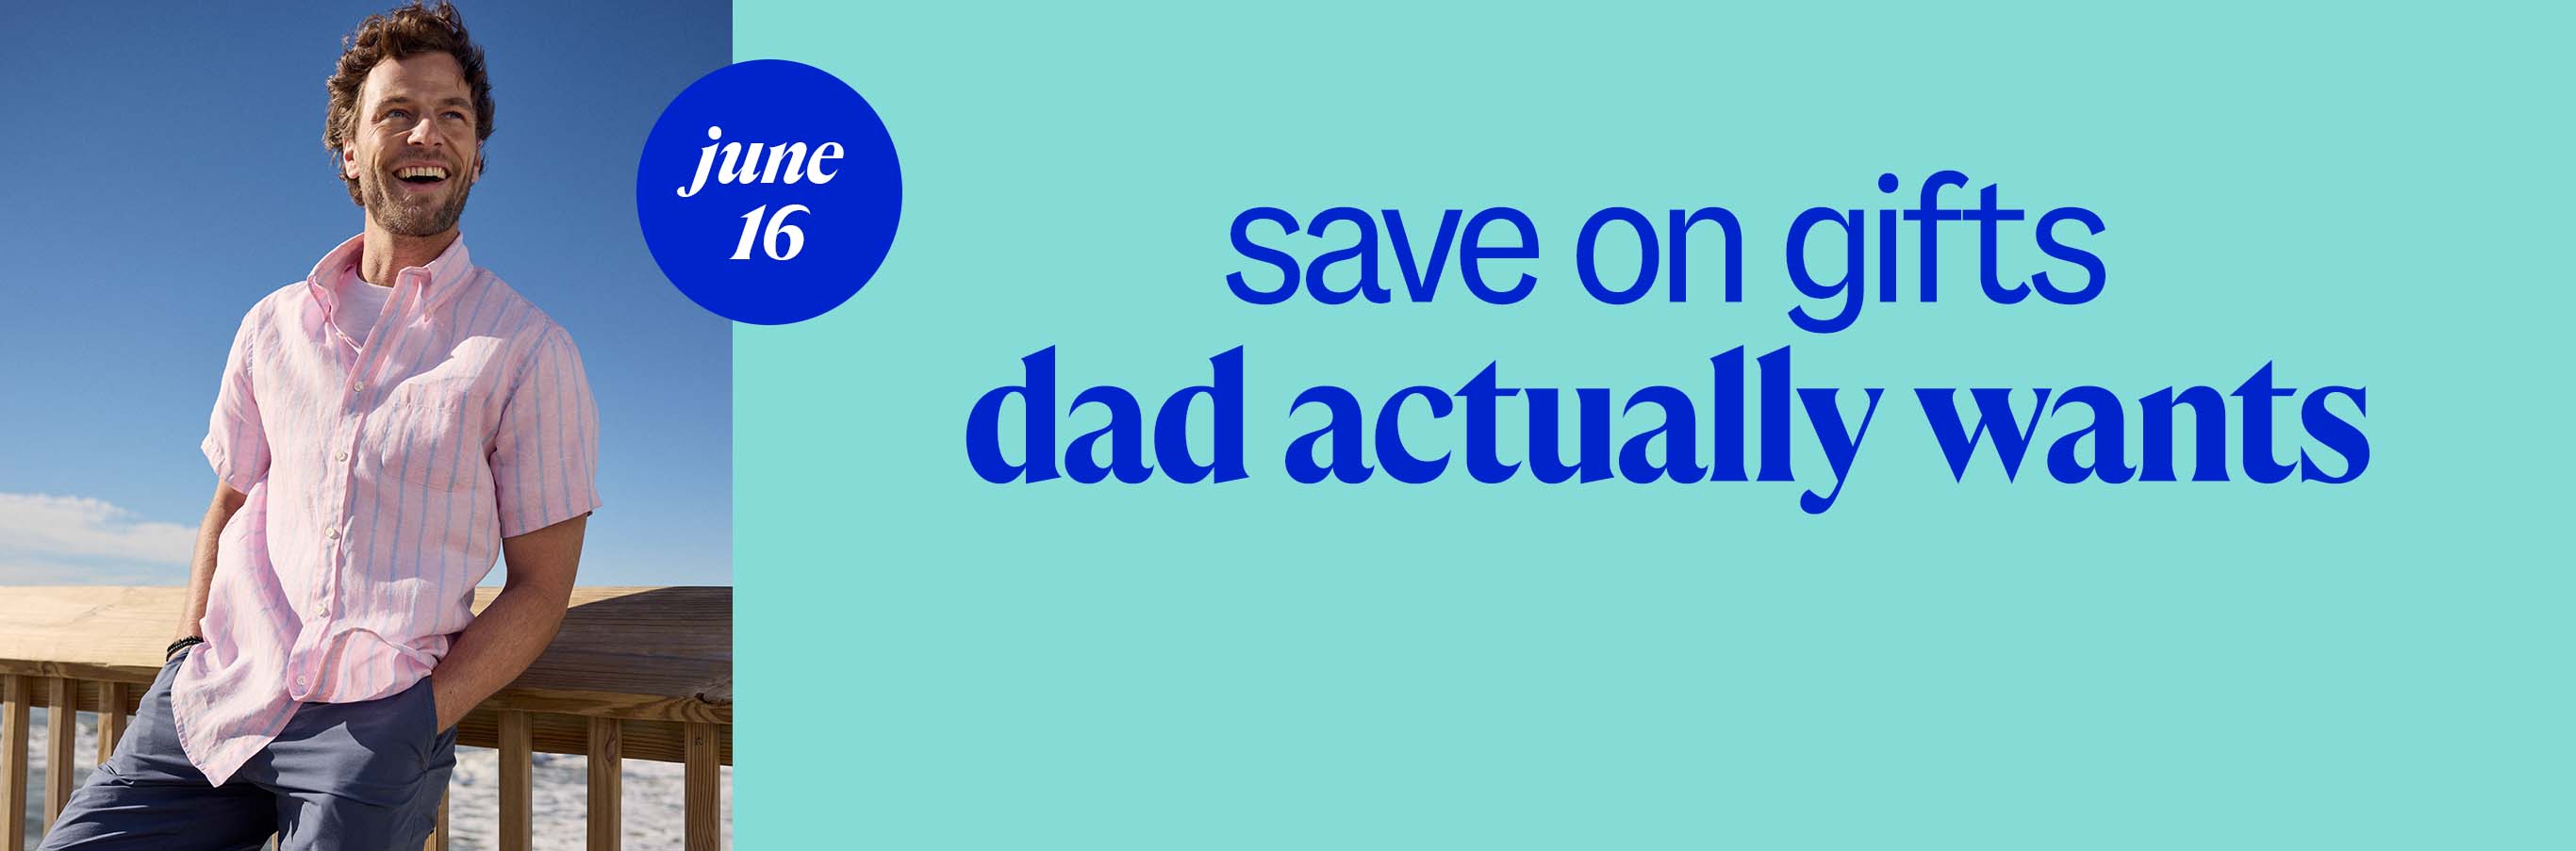 (june 16) save on gifts dad actually wants